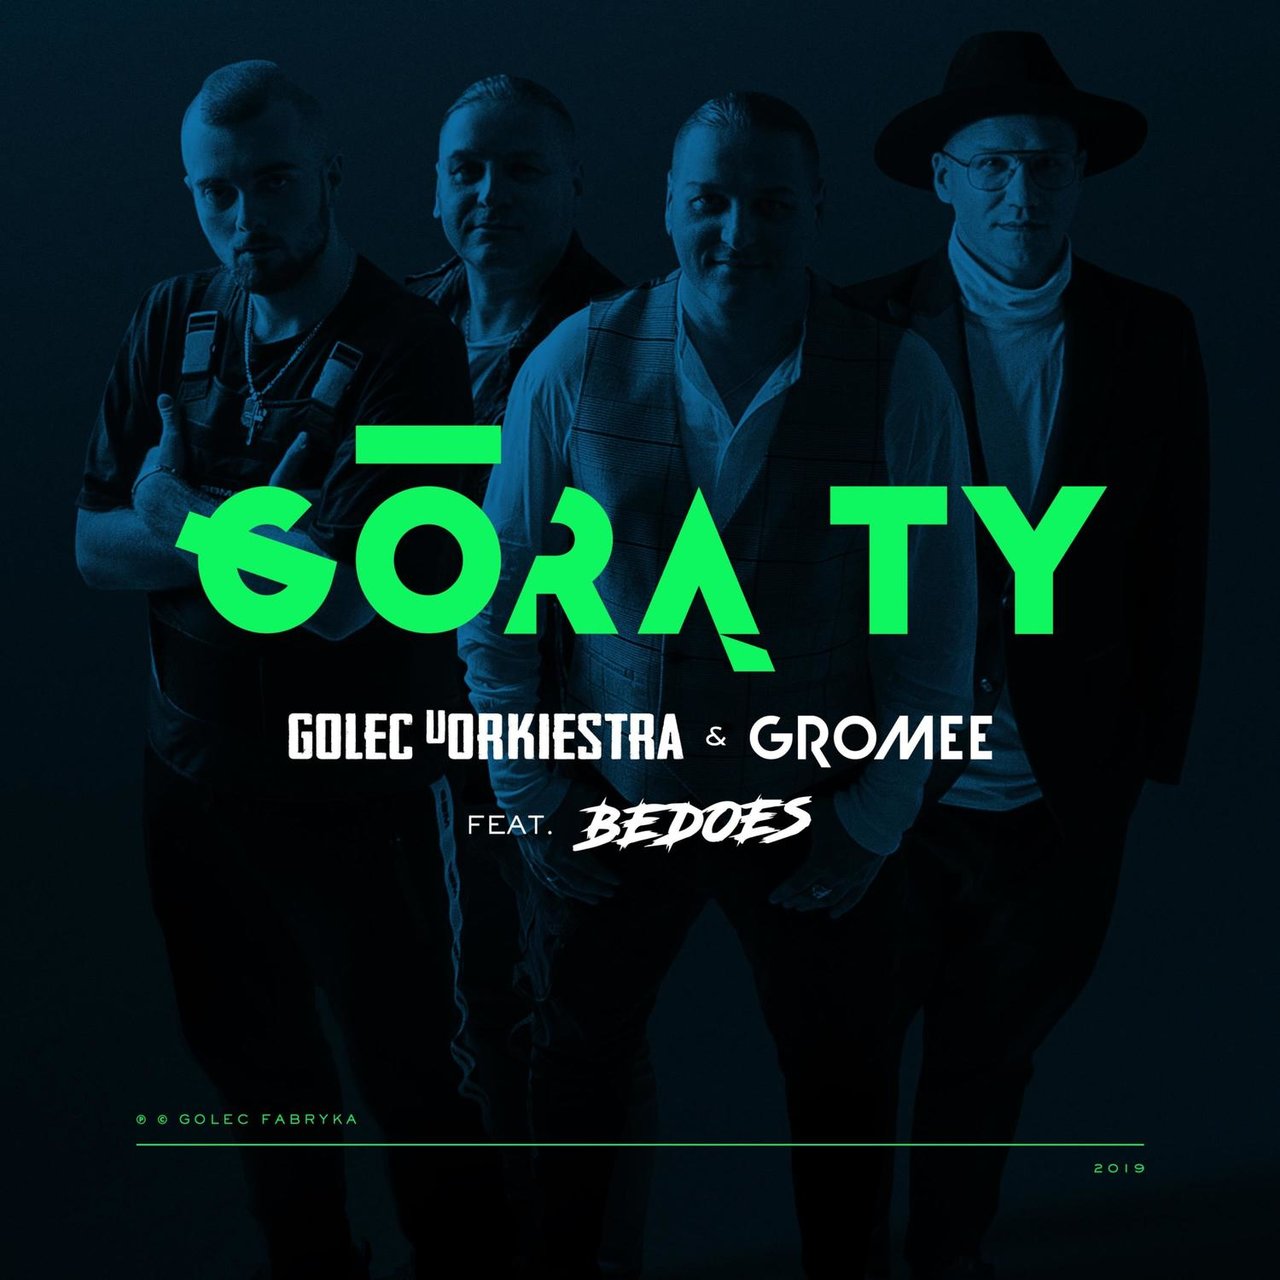 Golec uOrkiestra & Gromee ft. featuring Bedoes Górą Ty cover artwork